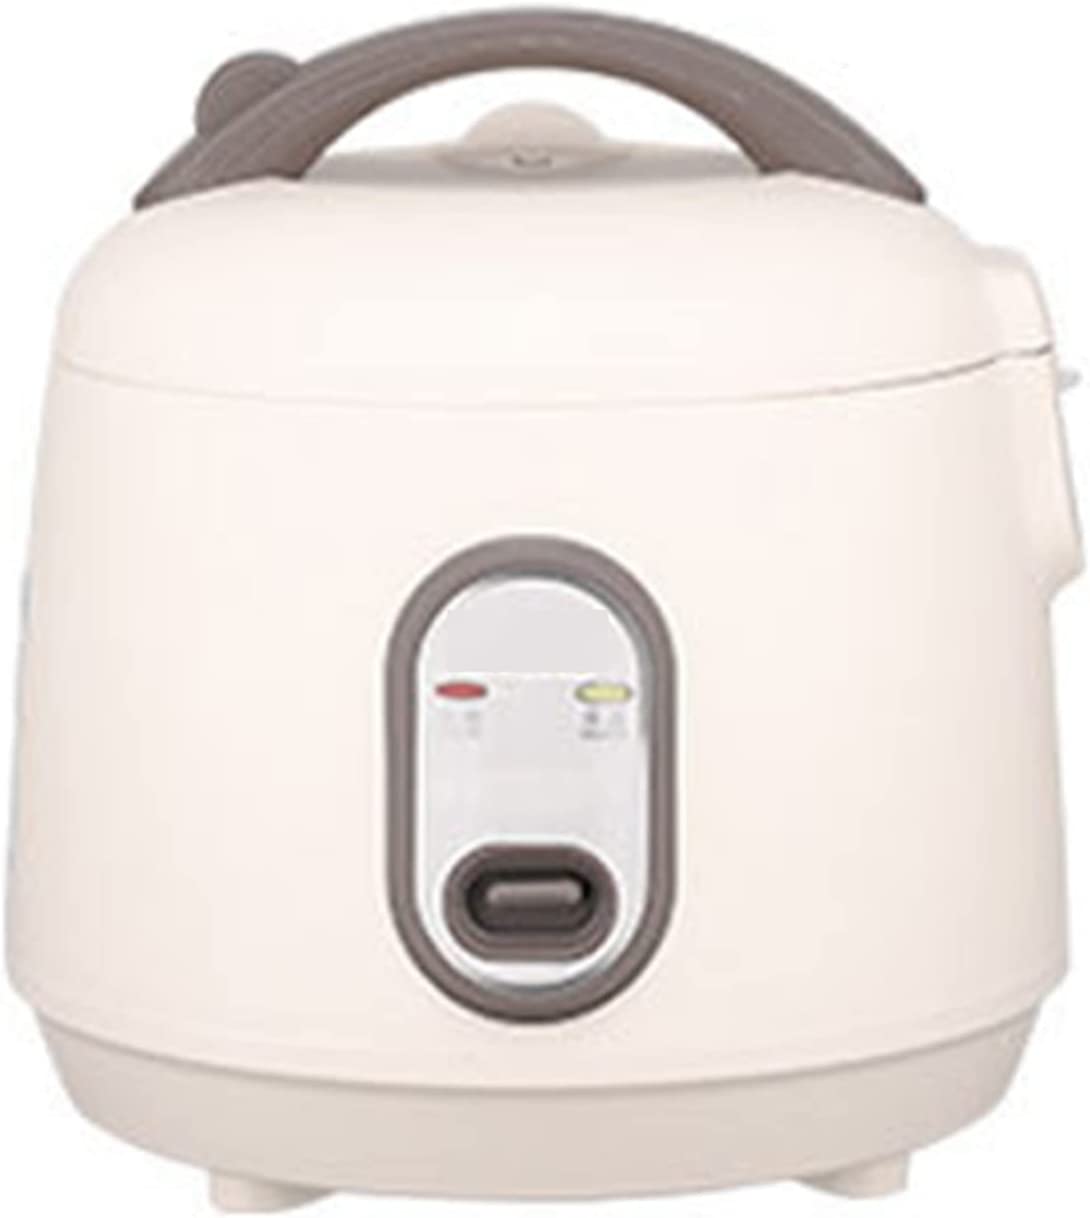 Mini Rice Cooker Electric Non-Stick Rice Cooker Alloy Plastic Multifunctional Portable Non-Stick Electric Rice Cooker 2L Lining (White)